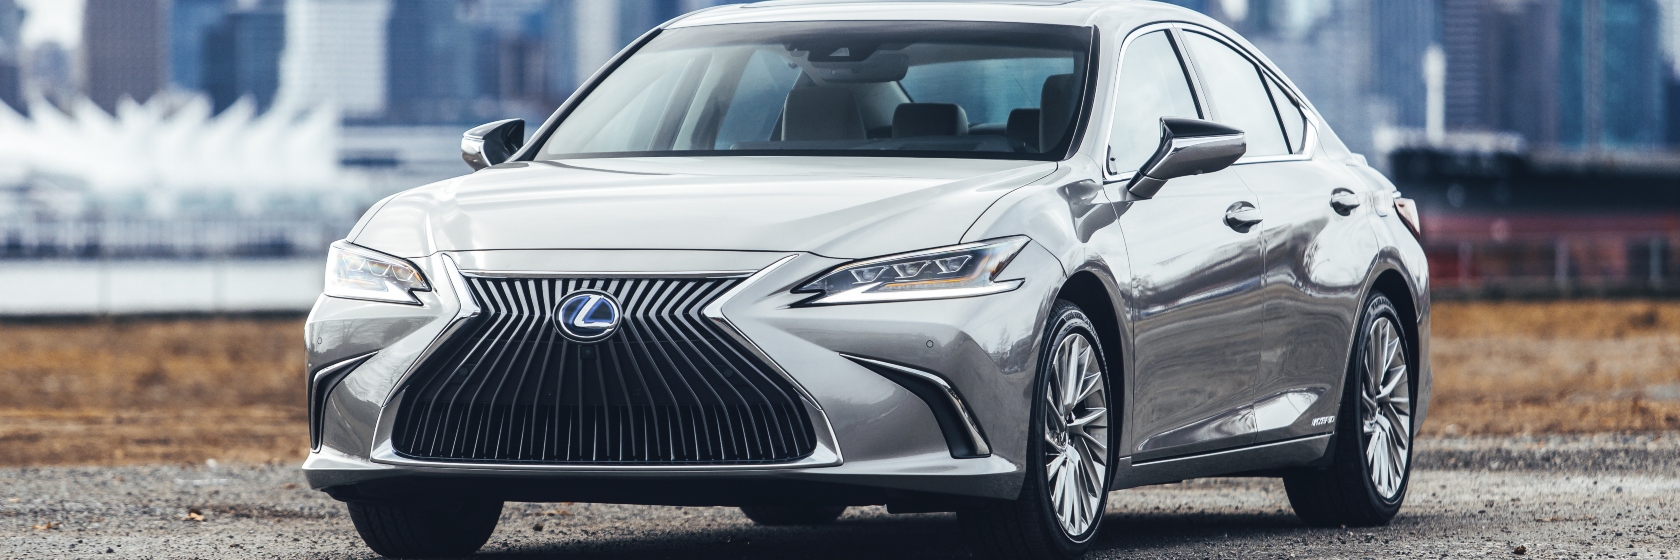 the-top-features-of-the-lexus-es-hybrid